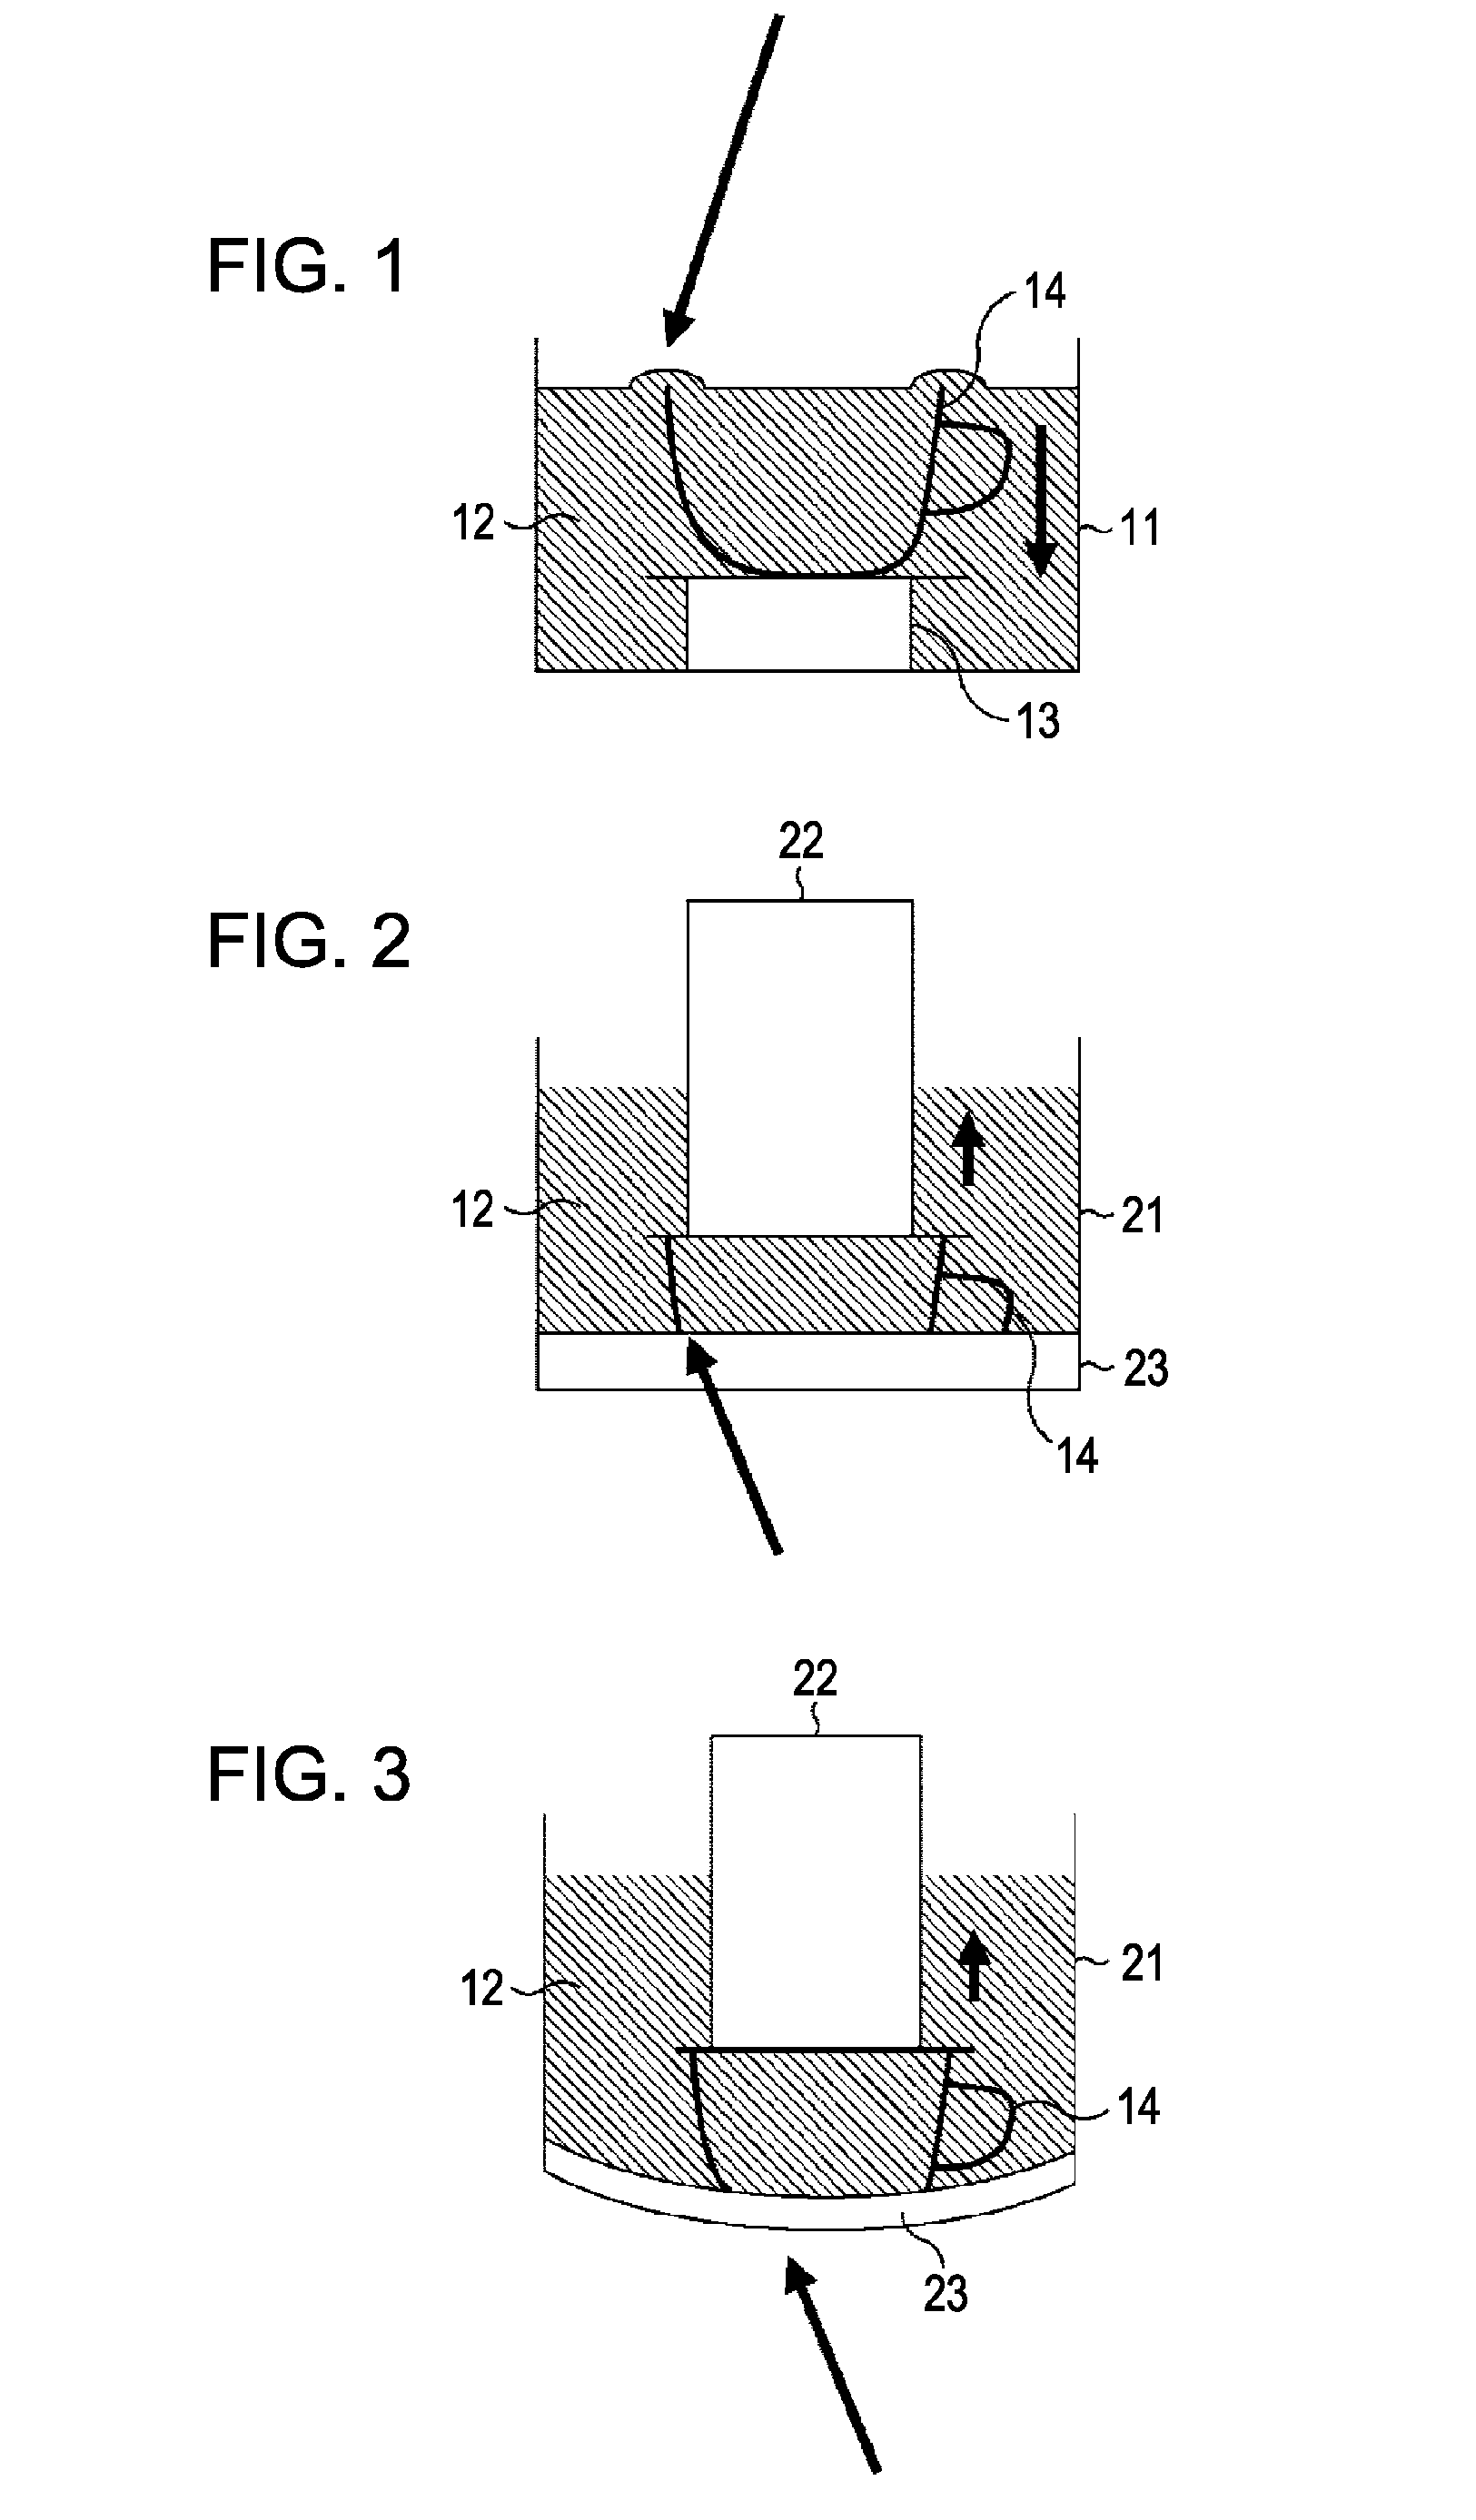 Stereolithography apparatus